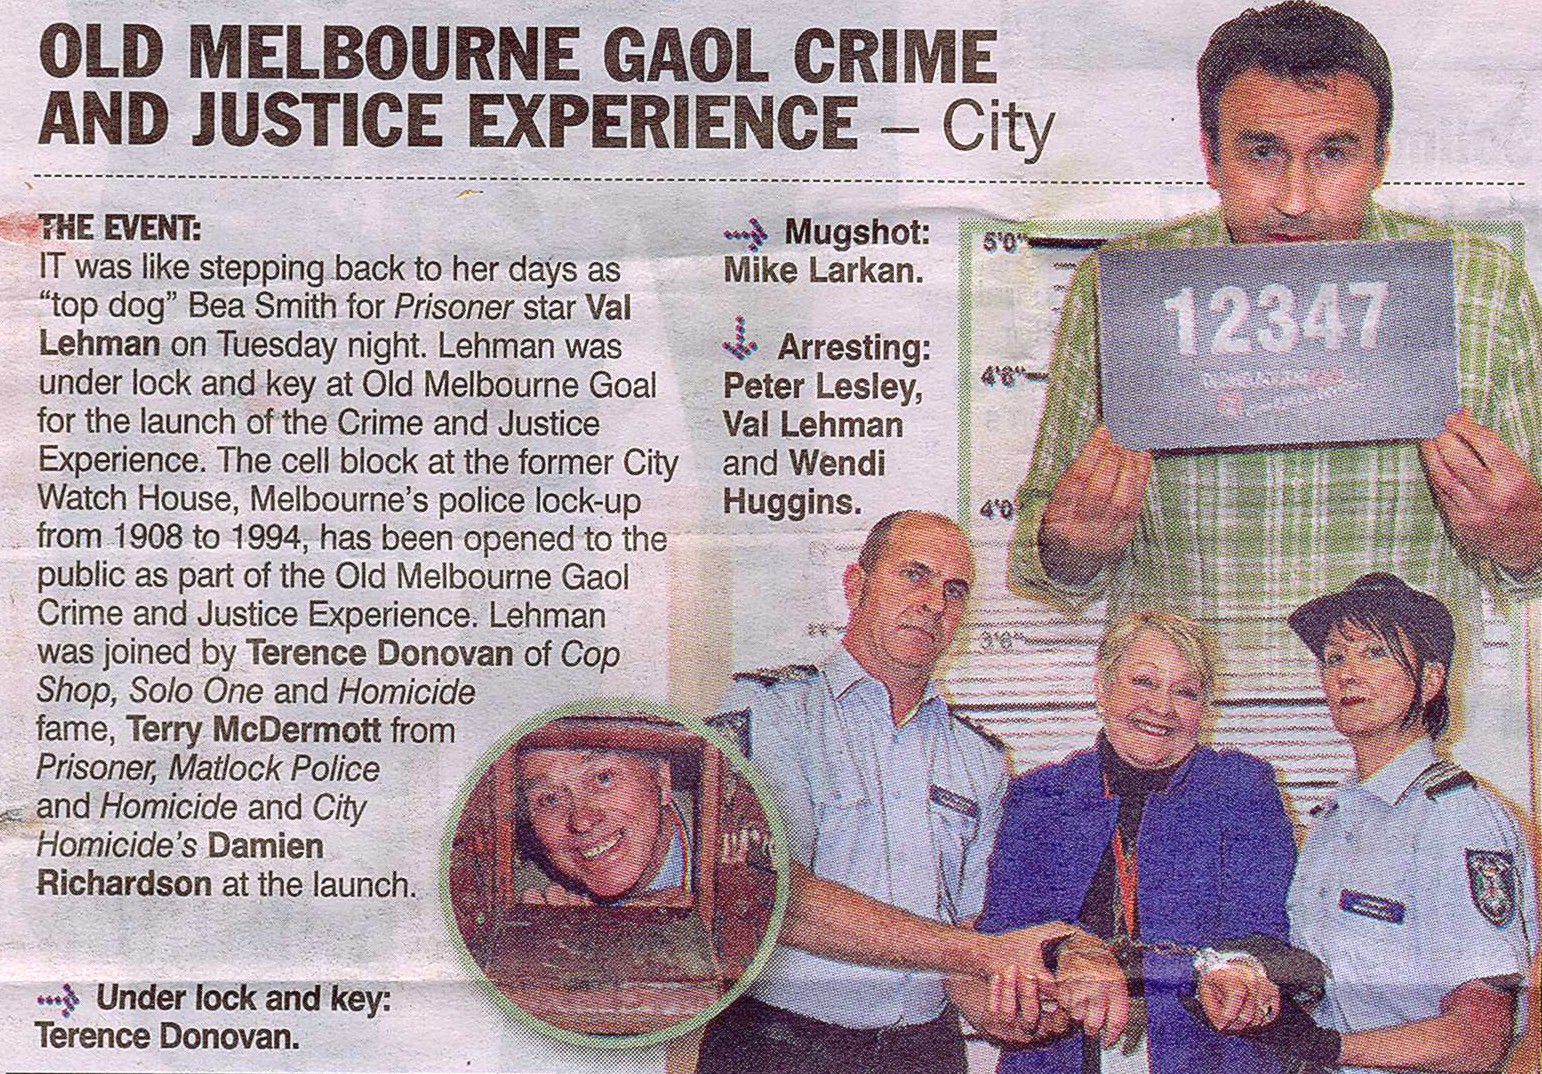 Peter Lesley as the Desk Sergeant at Melbourne City Watch House arresting Val Lehman of 